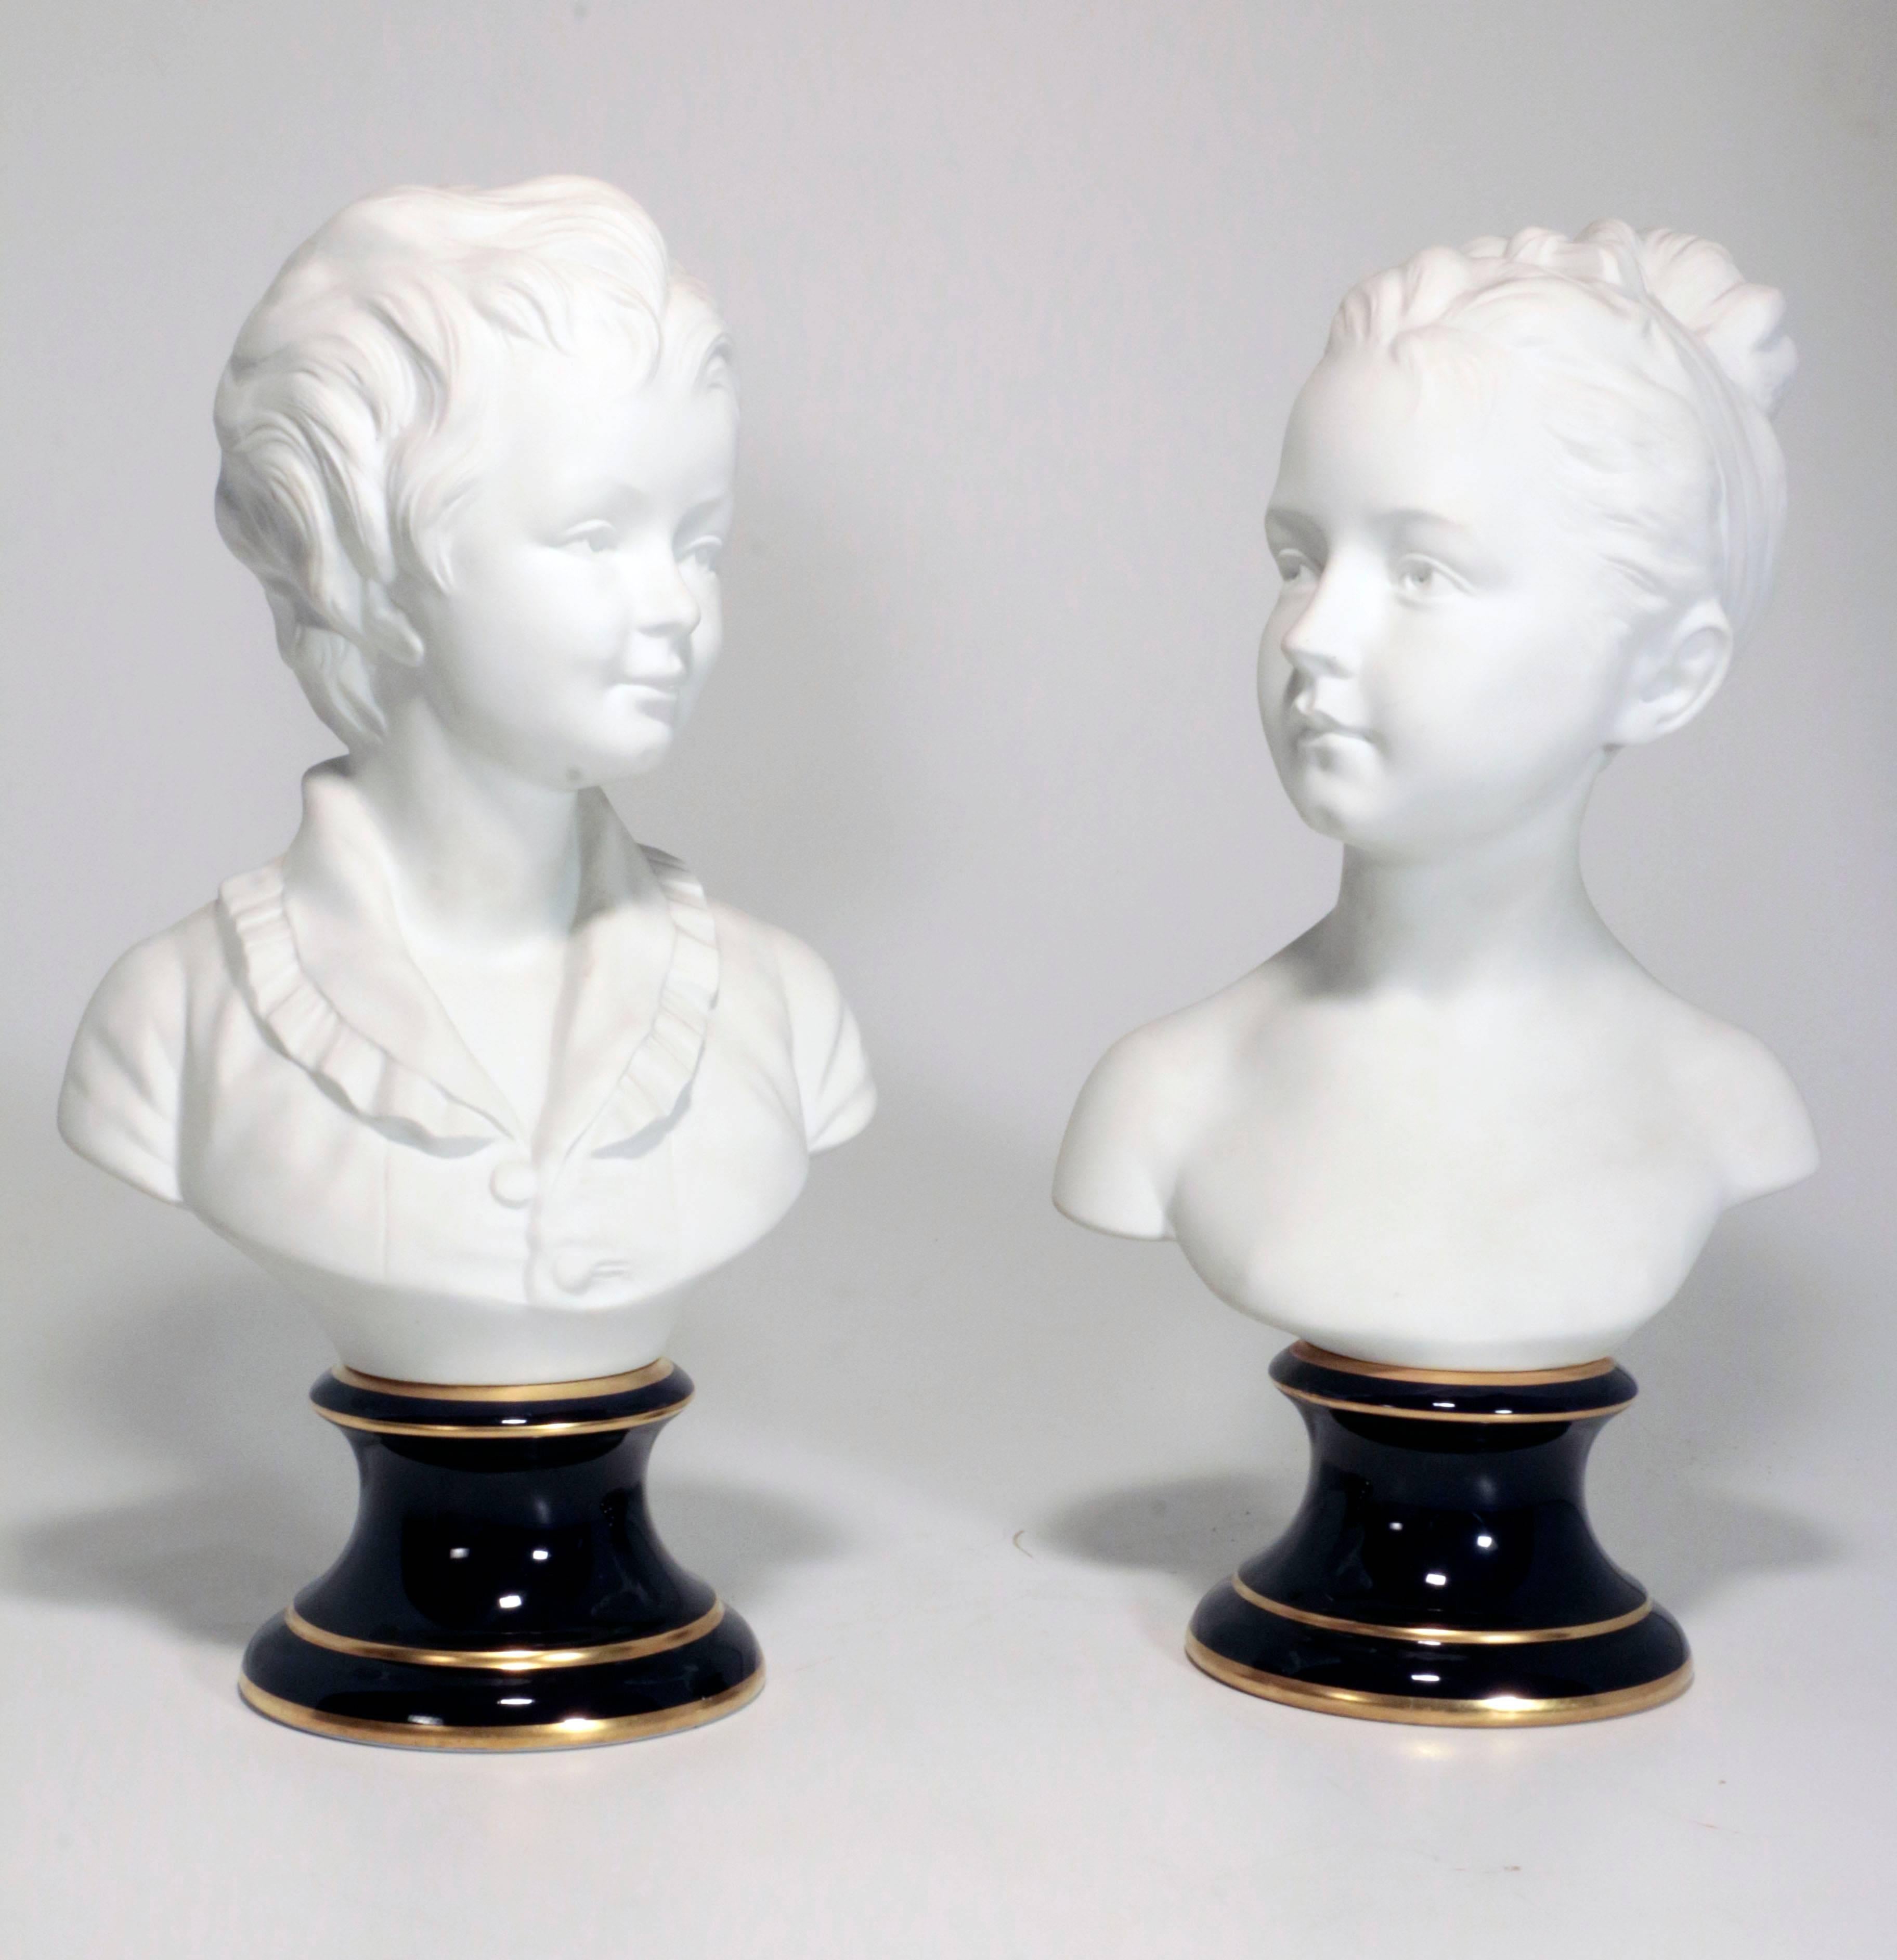 Pair of busts of Louise and Alexandre Brogniart in bisque porcelain on royal blue enameled base, by Tharaud, Limoges, after the originals by Jean-Antoine Houdon (1741-1828.)